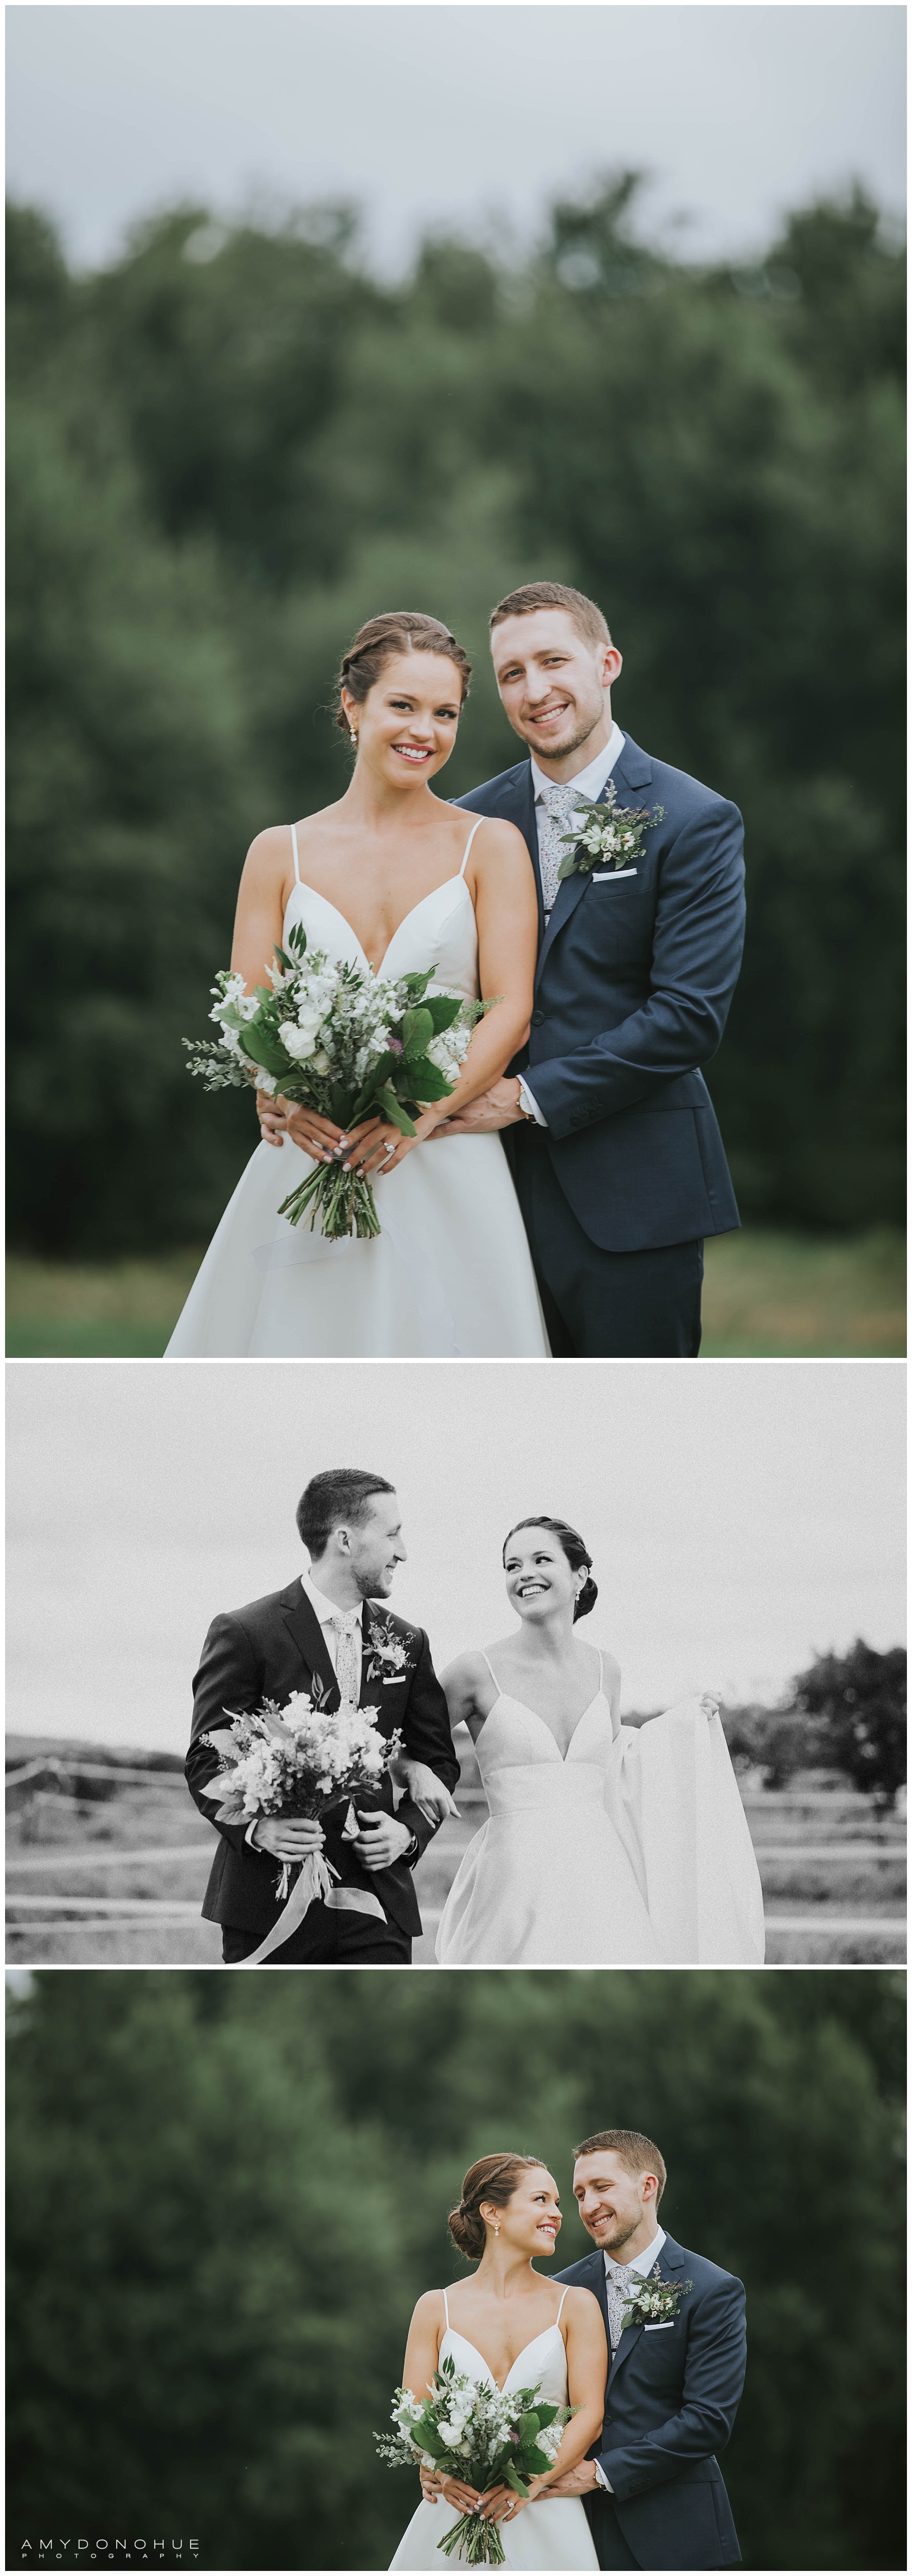 Bride and Groom Portraits | The Barn at Boyden Farms | Vermont Wedding Photographer | © Amy Donohue Photography